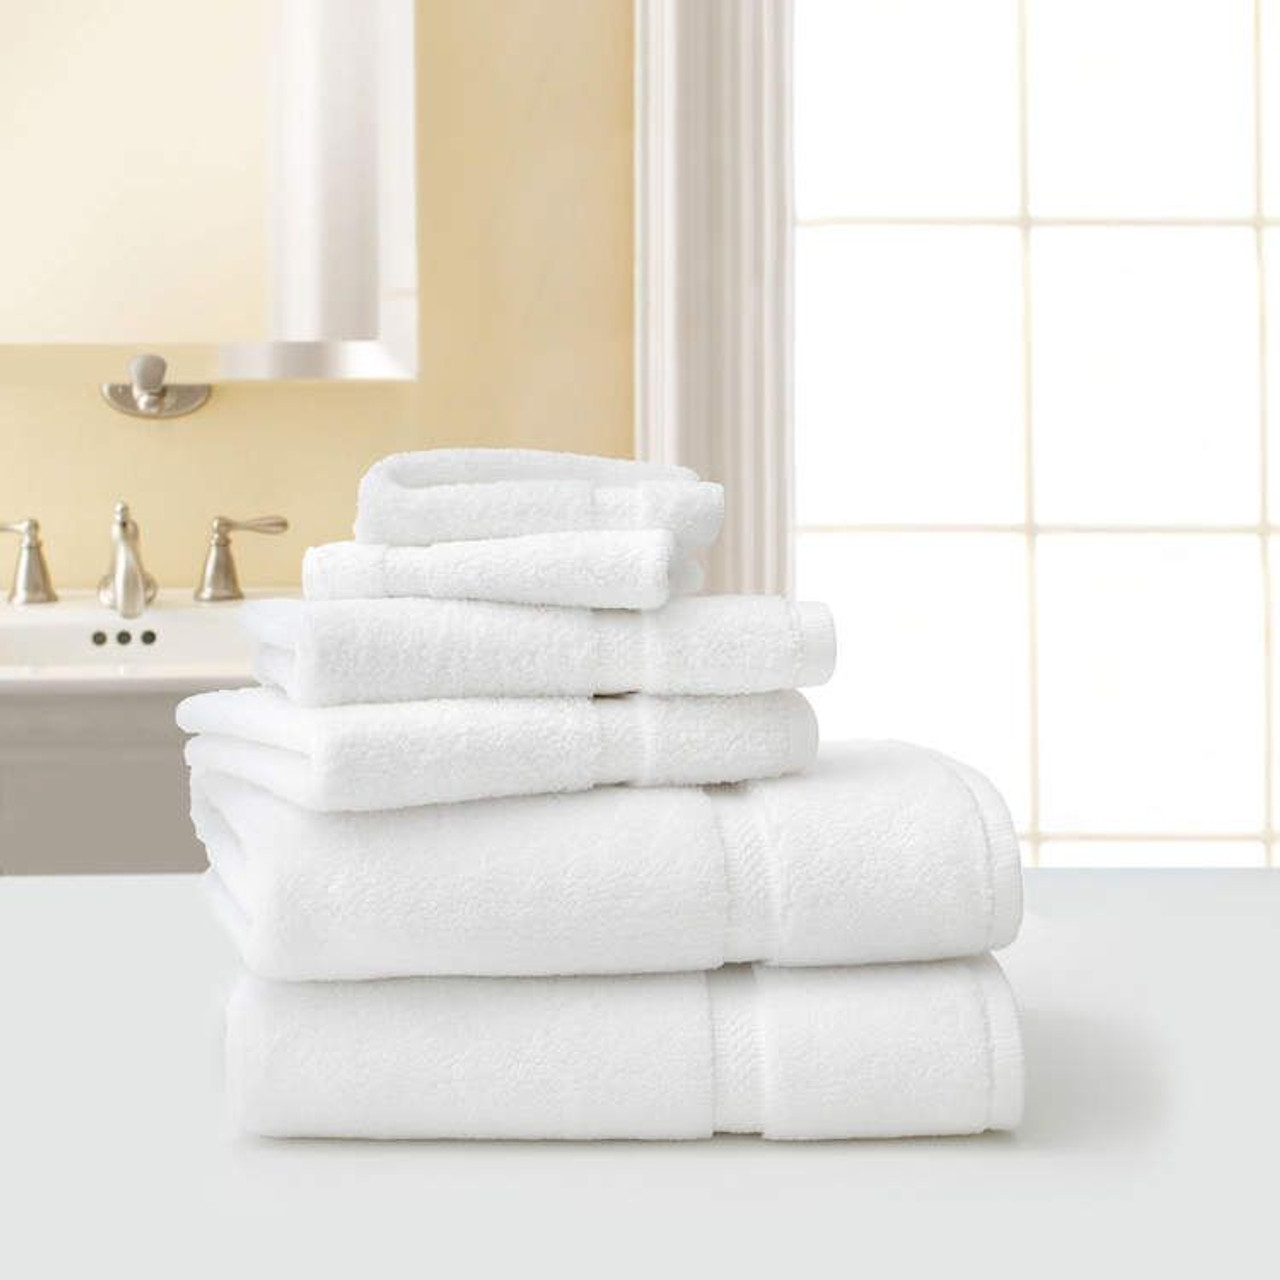 Wholesale Sheets and Towels